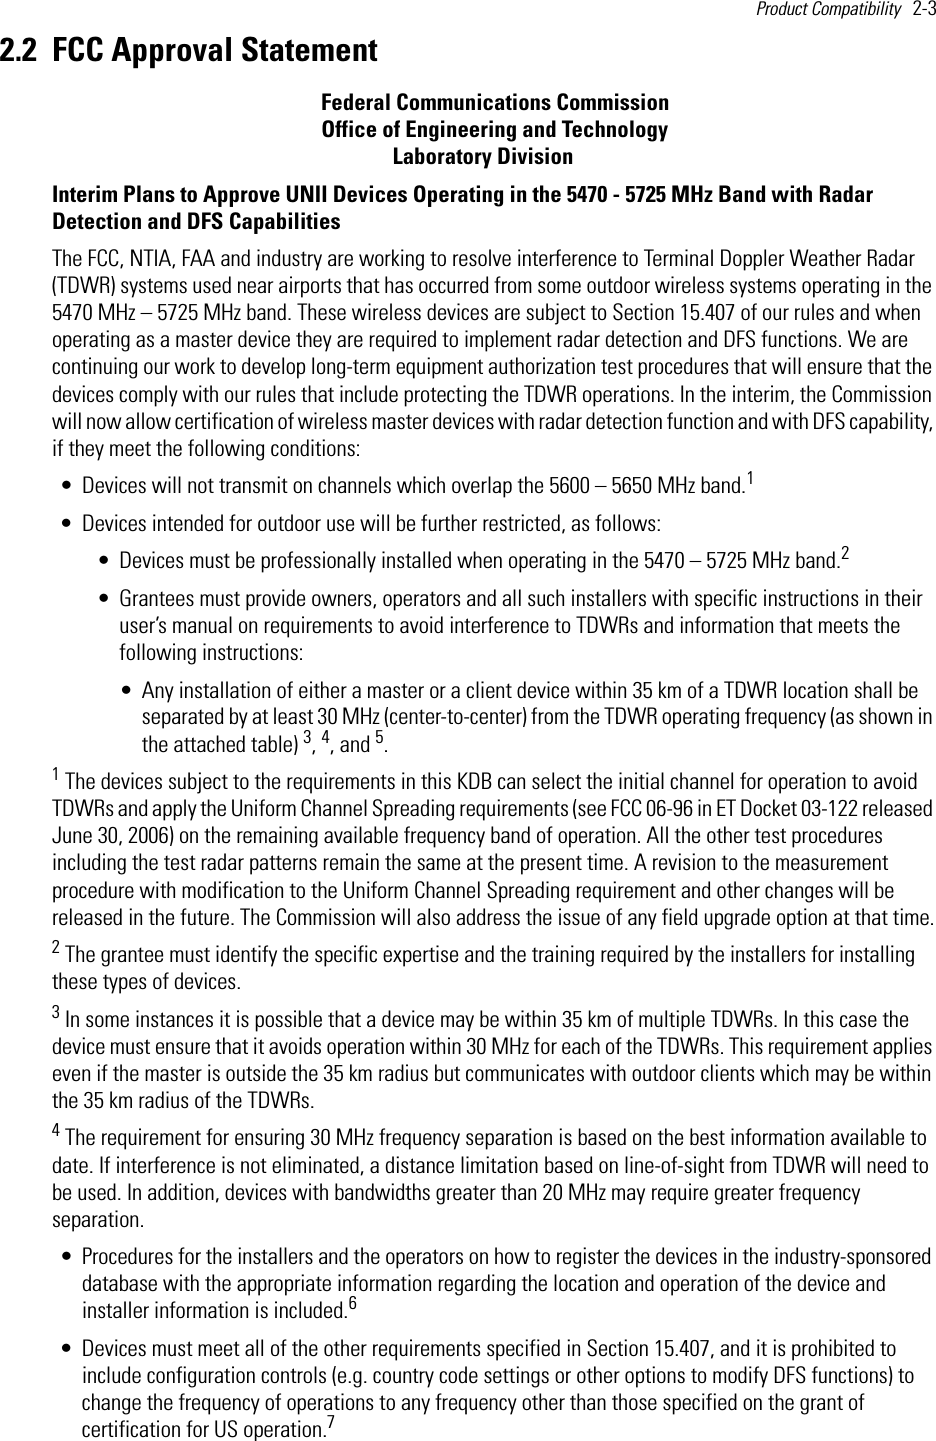 Product Compatibility   2-3 2.2 FCC Approval Statement                                                     Federal Communications Commission                                                      Office of Engineering and Technology                                                                    Laboratory DivisionInterim Plans to Approve UNII Devices Operating in the 5470 - 5725 MHz Band with Radar Detection and DFS CapabilitiesThe FCC, NTIA, FAA and industry are working to resolve interference to Terminal Doppler Weather Radar (TDWR) systems used near airports that has occurred from some outdoor wireless systems operating in the 5470 MHz – 5725 MHz band. These wireless devices are subject to Section 15.407 of our rules and when operating as a master device they are required to implement radar detection and DFS functions. We are continuing our work to develop long-term equipment authorization test procedures that will ensure that the devices comply with our rules that include protecting the TDWR operations. In the interim, the Commission will now allow certification of wireless master devices with radar detection function and with DFS capability, if they meet the following conditions:• Devices will not transmit on channels which overlap the 5600 – 5650 MHz band.1• Devices intended for outdoor use will be further restricted, as follows:• Devices must be professionally installed when operating in the 5470 – 5725 MHz band.2• Grantees must provide owners, operators and all such installers with specific instructions in their user’s manual on requirements to avoid interference to TDWRs and information that meets the following instructions:• Any installation of either a master or a client device within 35 km of a TDWR location shall be separated by at least 30 MHz (center-to-center) from the TDWR operating frequency (as shown in the attached table) 3, 4, and 5.1 The devices subject to the requirements in this KDB can select the initial channel for operation to avoid TDWRs and apply the Uniform Channel Spreading requirements (see FCC 06-96 in ET Docket 03-122 released June 30, 2006) on the remaining available frequency band of operation. All the other test procedures including the test radar patterns remain the same at the present time. A revision to the measurement procedure with modification to the Uniform Channel Spreading requirement and other changes will be released in the future. The Commission will also address the issue of any field upgrade option at that time.2 The grantee must identify the specific expertise and the training required by the installers for installing these types of devices.3 In some instances it is possible that a device may be within 35 km of multiple TDWRs. In this case the device must ensure that it avoids operation within 30 MHz for each of the TDWRs. This requirement applies even if the master is outside the 35 km radius but communicates with outdoor clients which may be within the 35 km radius of the TDWRs.4 The requirement for ensuring 30 MHz frequency separation is based on the best information available to date. If interference is not eliminated, a distance limitation based on line-of-sight from TDWR will need to be used. In addition, devices with bandwidths greater than 20 MHz may require greater frequency separation.• Procedures for the installers and the operators on how to register the devices in the industry-sponsored database with the appropriate information regarding the location and operation of the device and installer information is included.6• Devices must meet all of the other requirements specified in Section 15.407, and it is prohibited to include configuration controls (e.g. country code settings or other options to modify DFS functions) to change the frequency of operations to any frequency other than those specified on the grant of certification for US operation.7